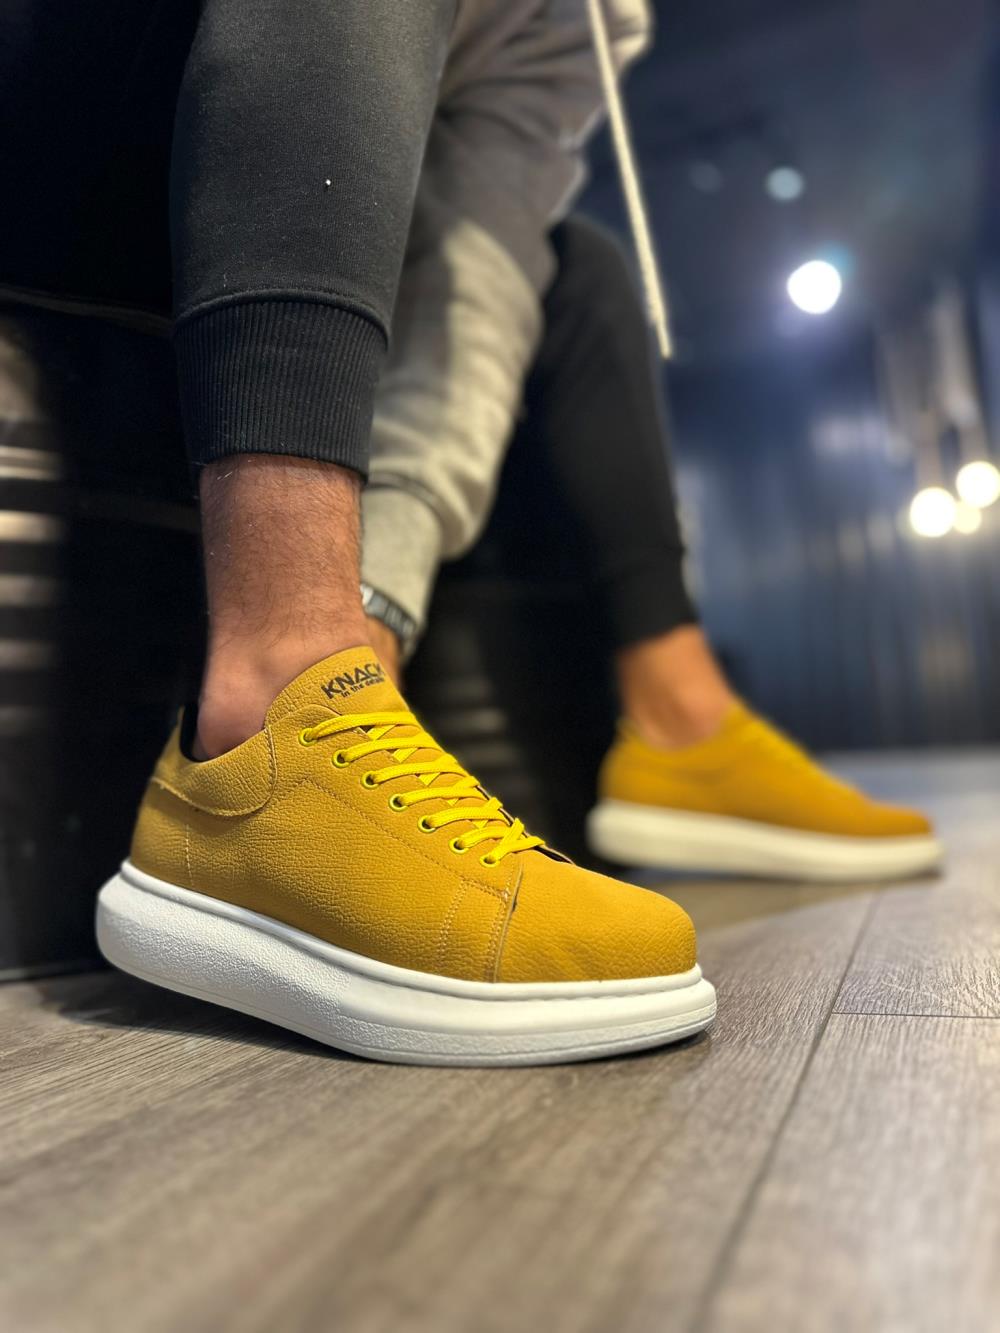 Men's High Sole Casual Shoes 045 Yellow (White Sole) - STREETMODE™